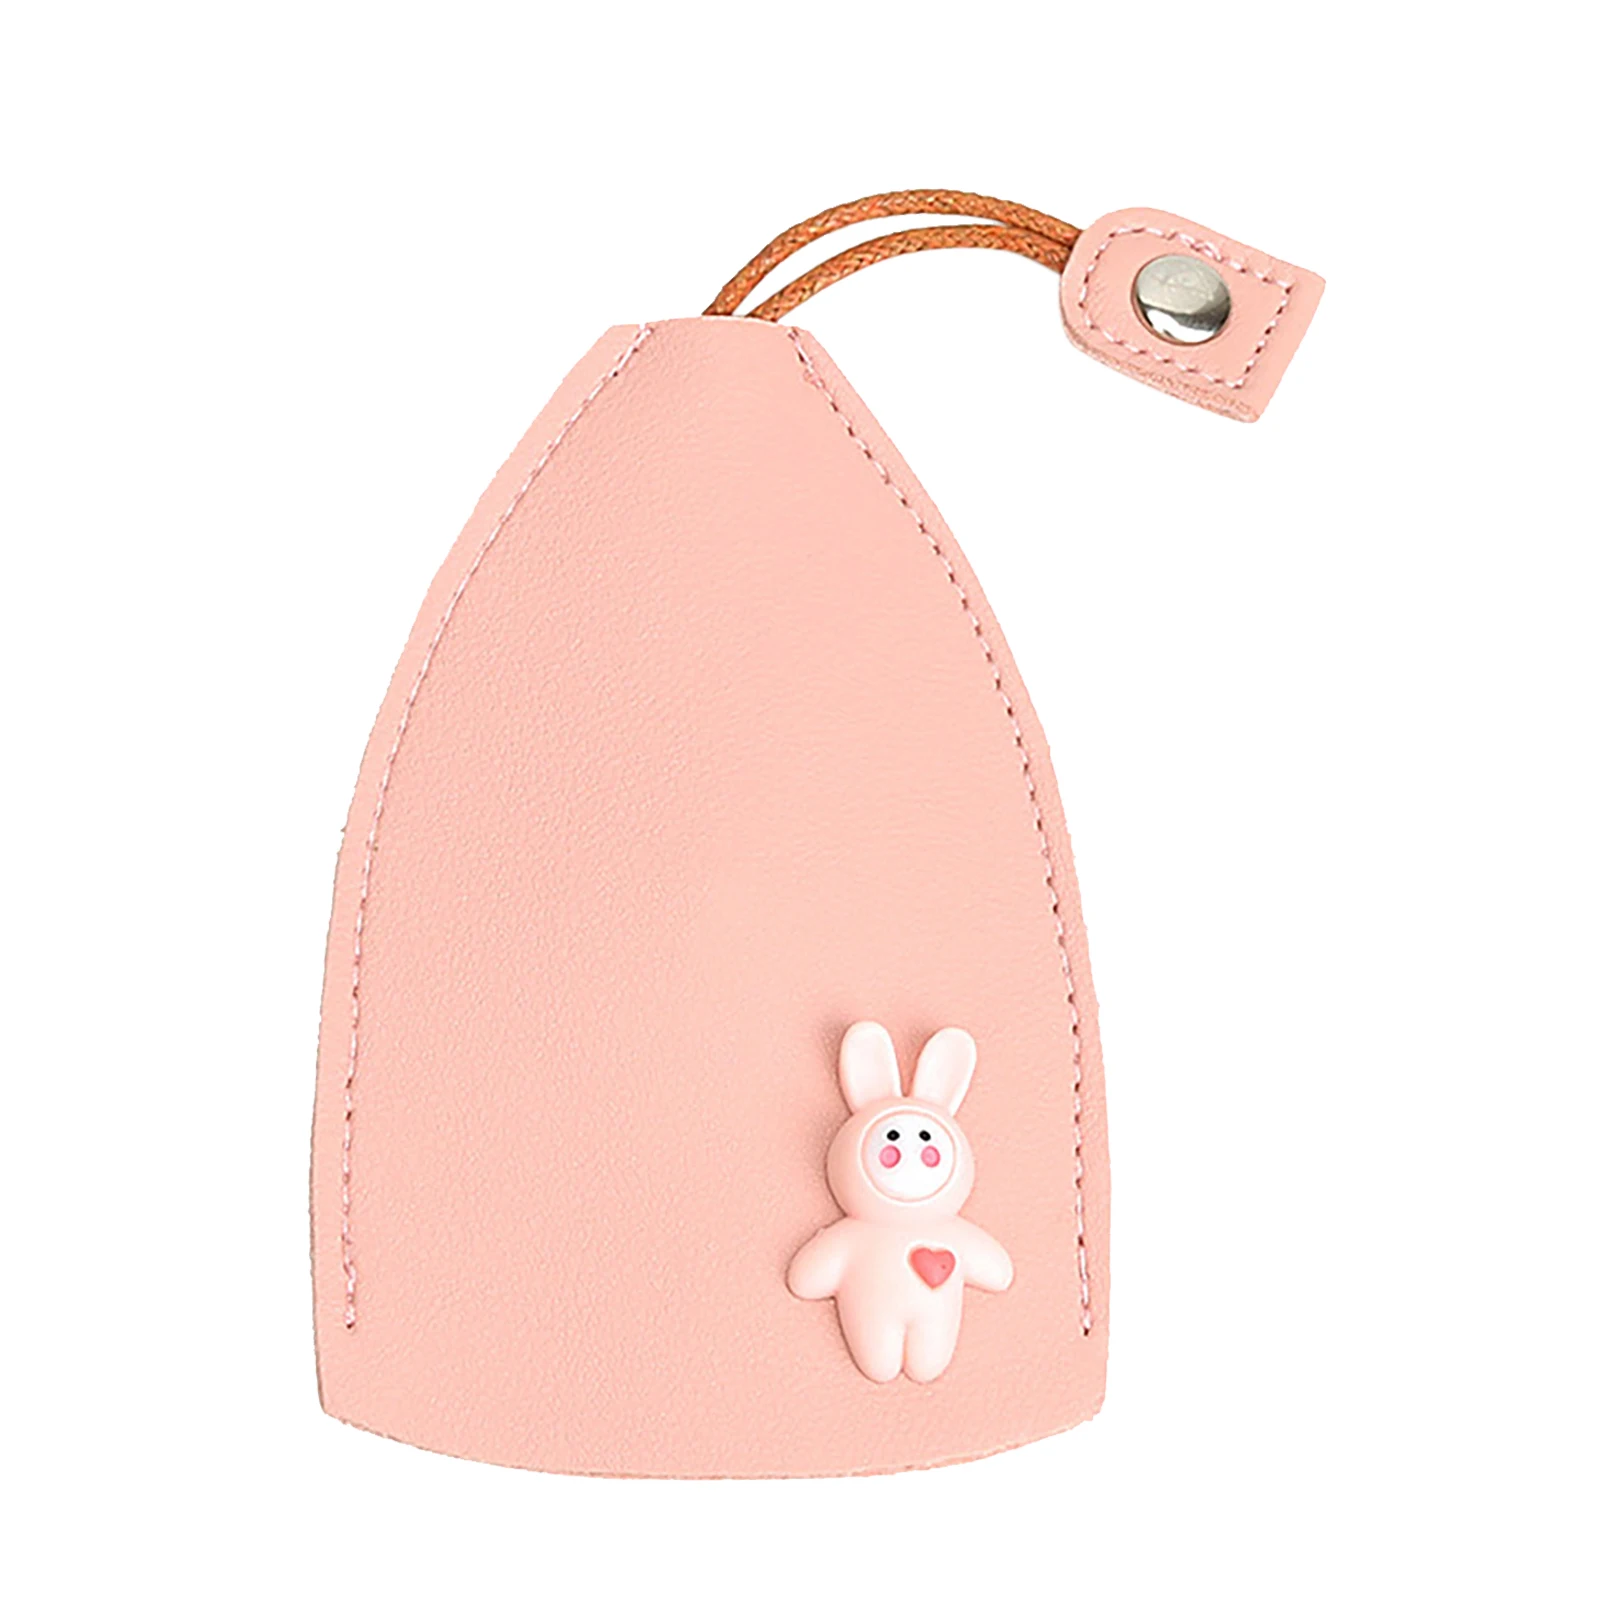 Cute Rabbit Creative Pull Type Key Bag PU Leather Key Wallets Housekeepers Car Key Holder Case Leather Keychain Pouch Sleeve